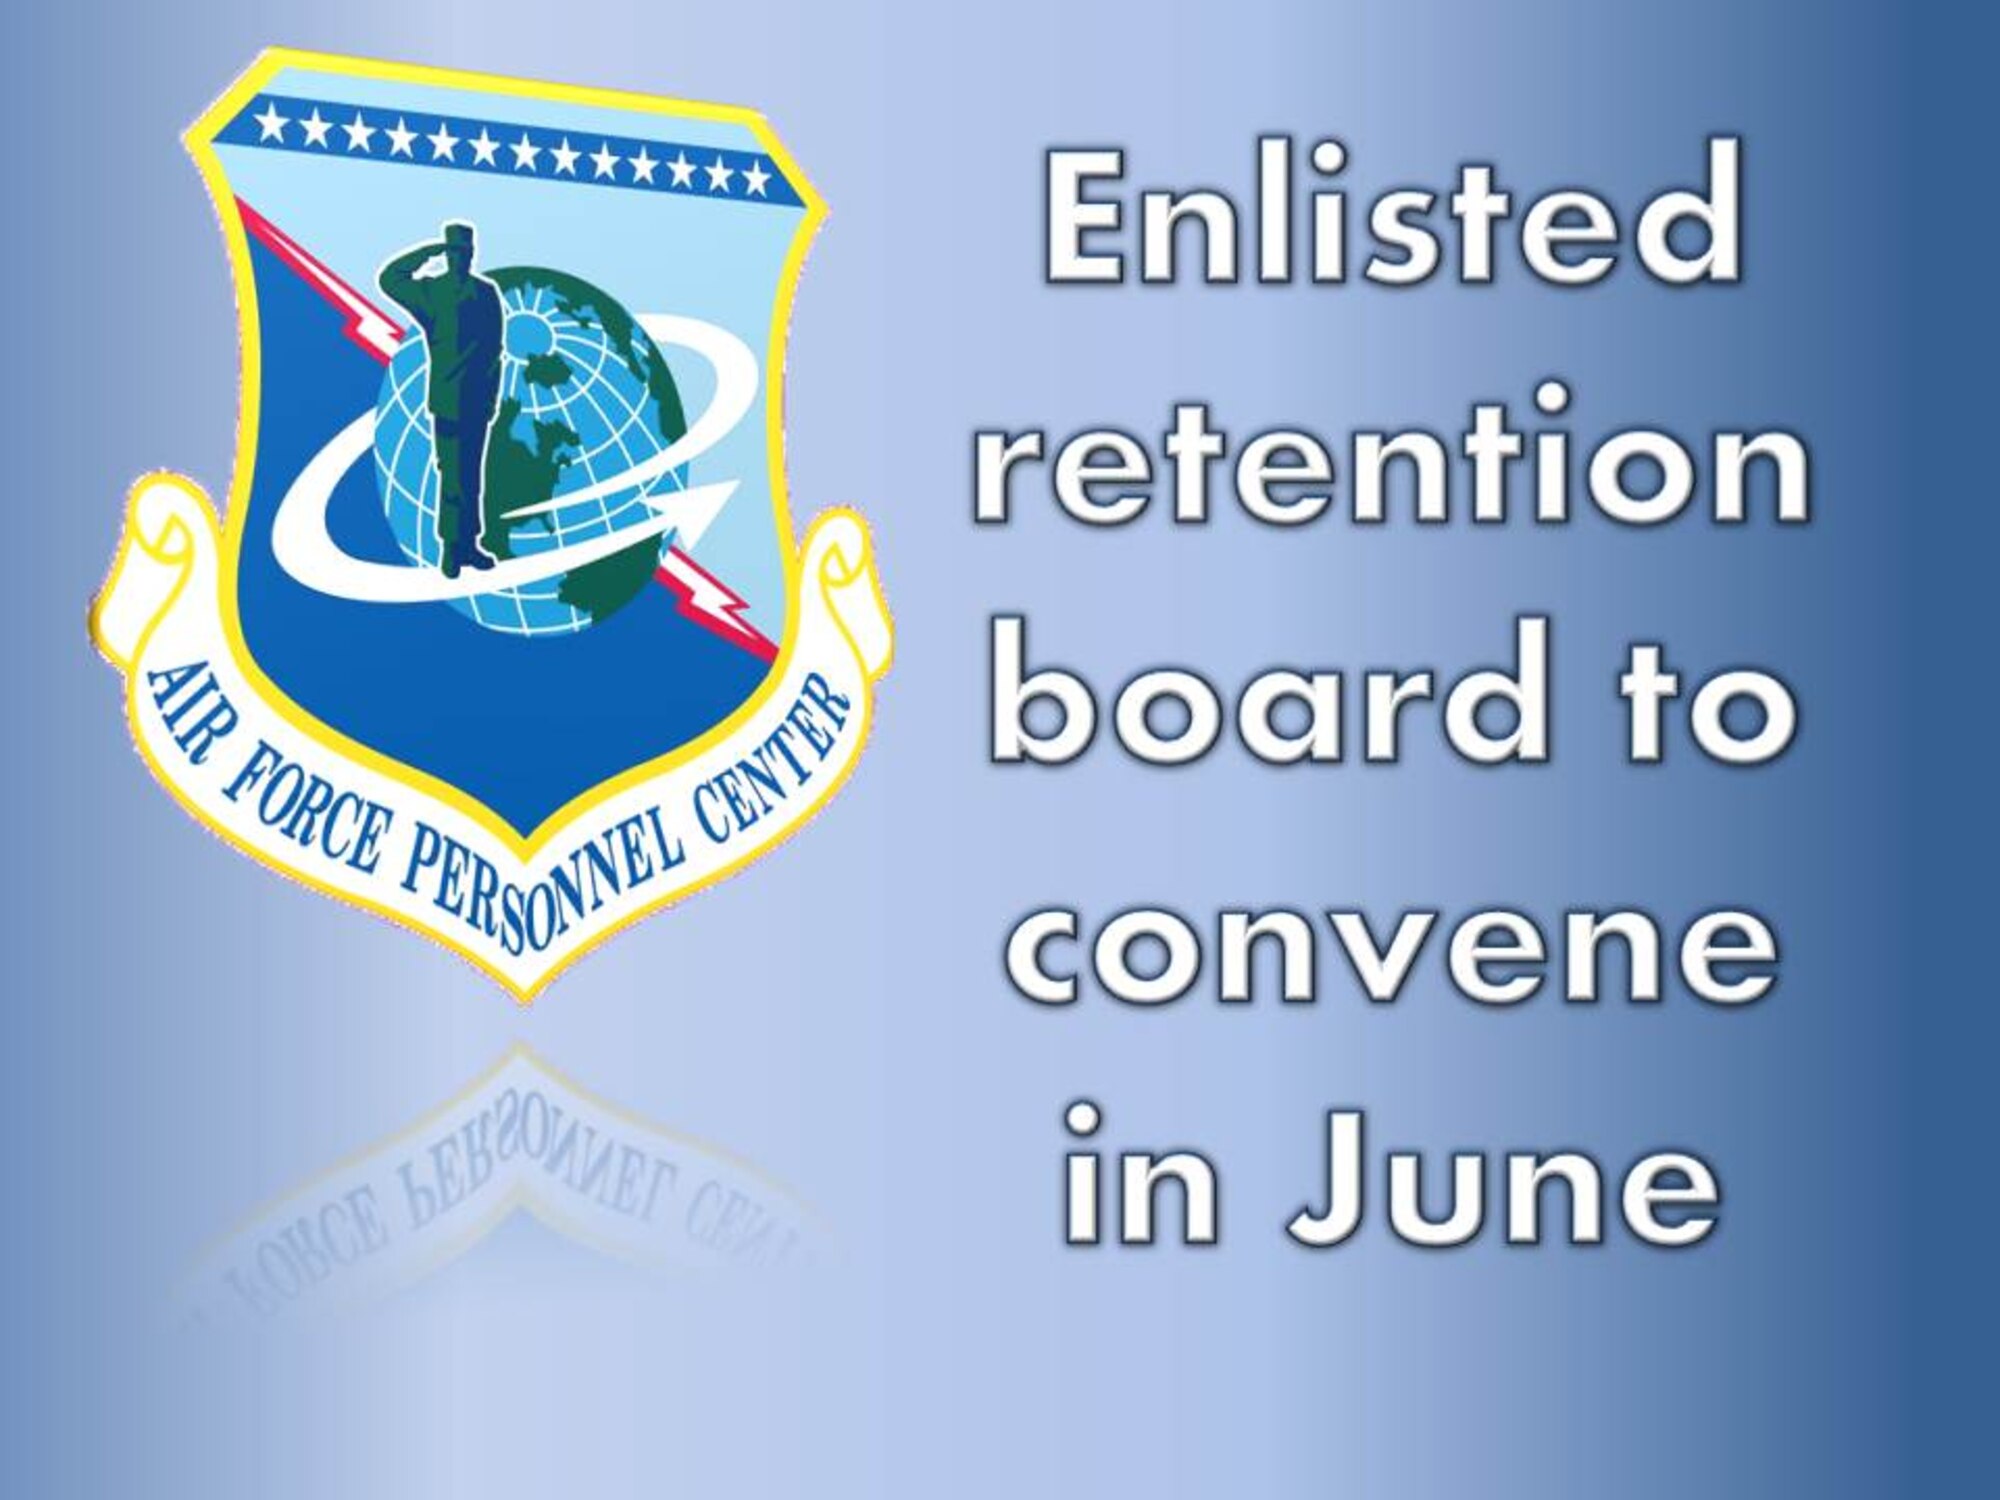 An enlisted retention board will convene here in June 2014 to consider eligible senior airmen through senior master sergeants for retention, according to Air Force Personnel Center officials. The enlisted retention program is one of several expanded force management programs that have been or will be implemented this year, said Lt. Col. Rick Garcia, the AFPC Retirements and Separations Branch Chief. (U.S. Air Force graphic/Staff Sgt. Luis Loza Gutierriez) 
